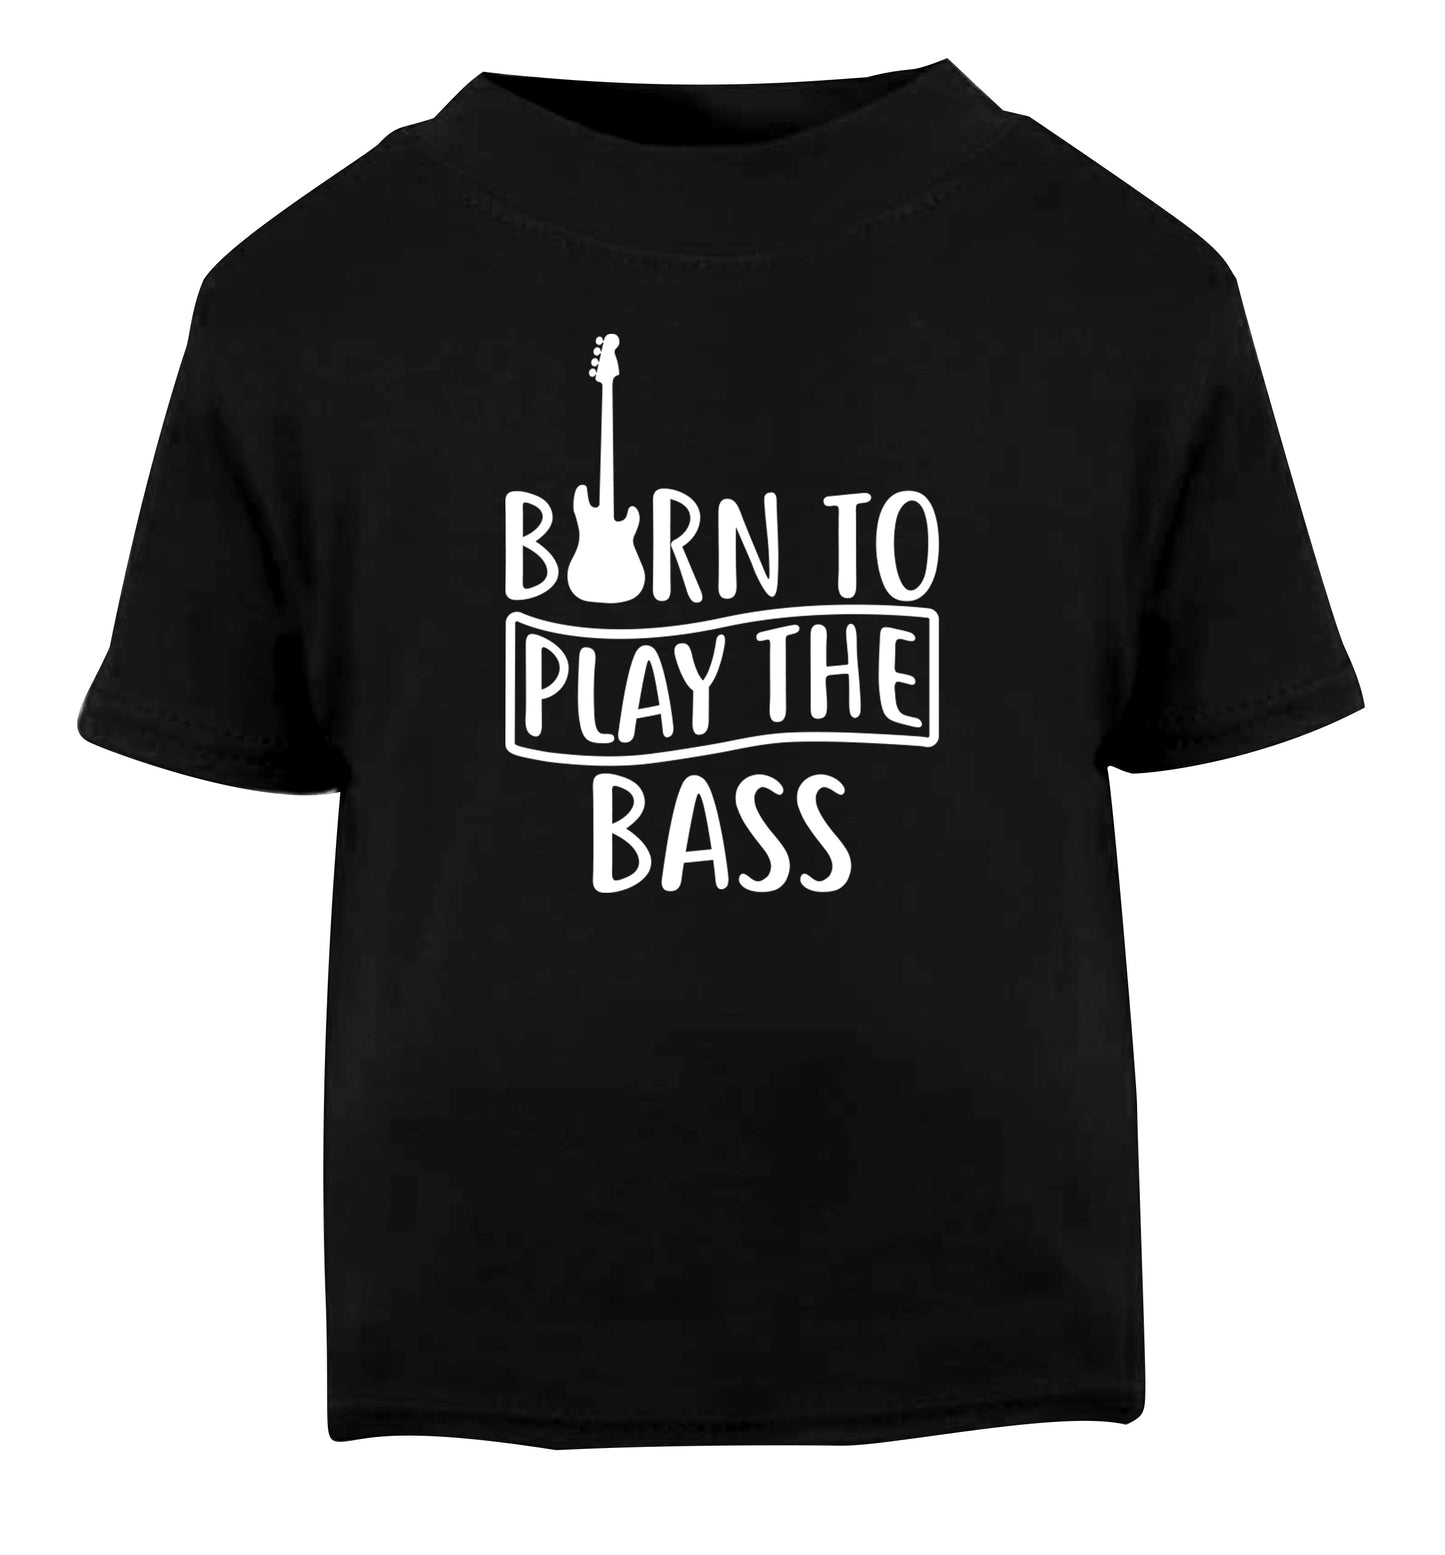 Born to play the bass Black Baby Toddler Tshirt 2 years